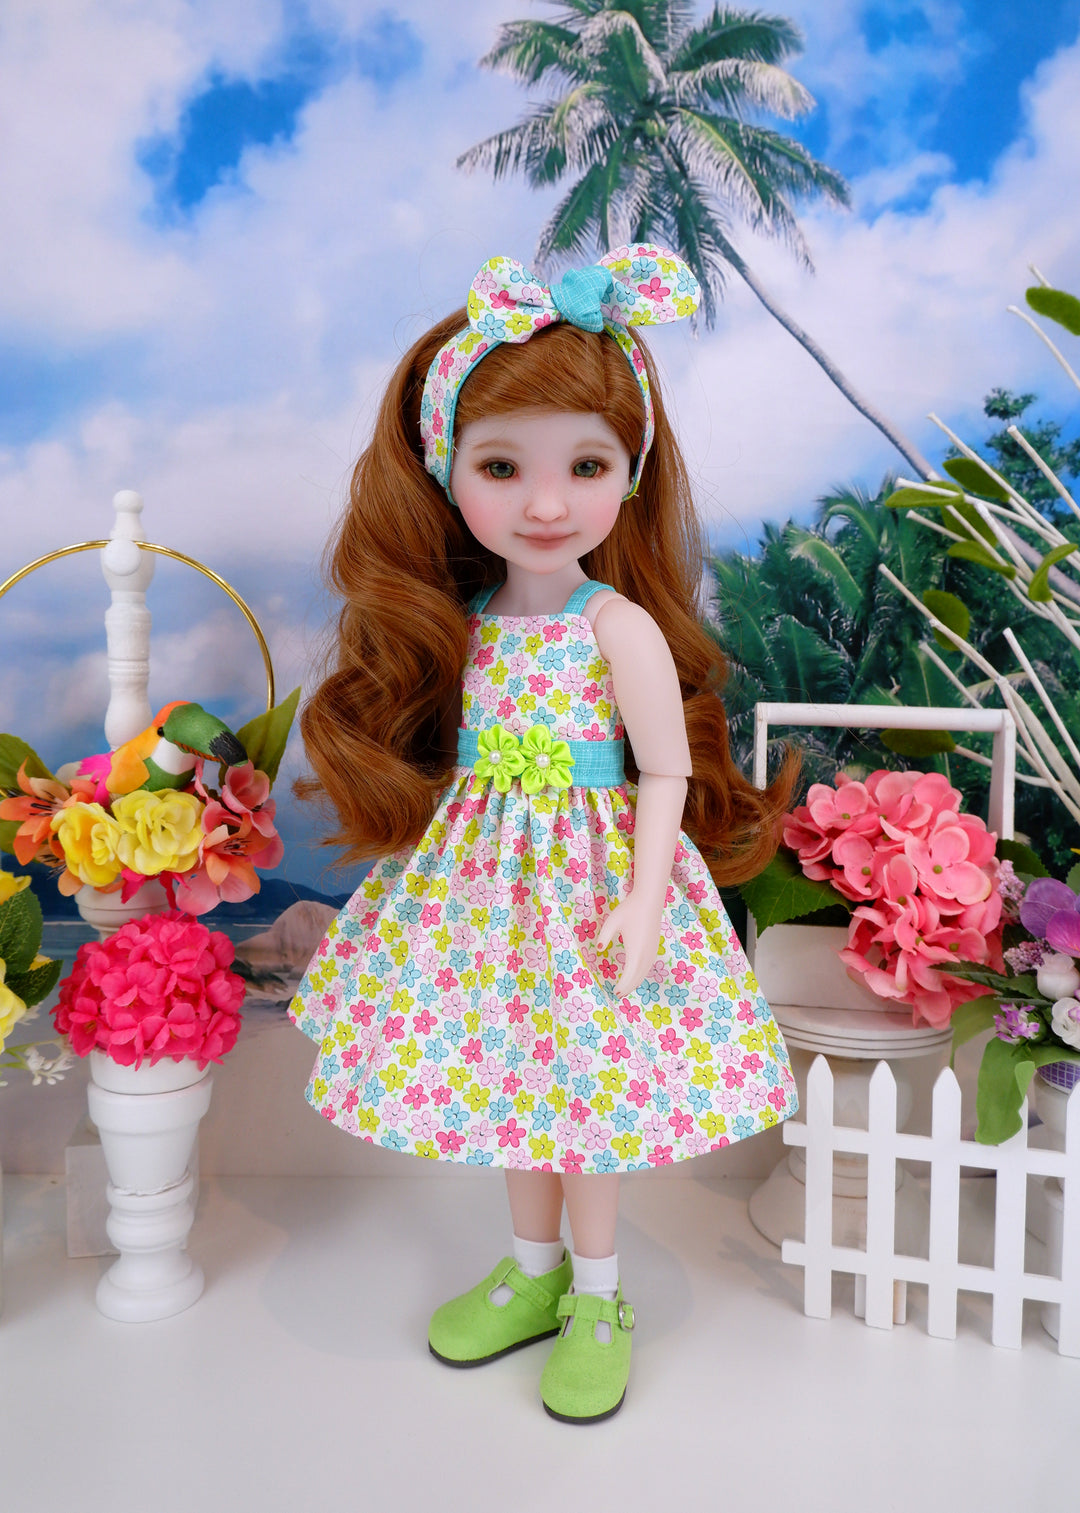 Tropical Brights - dress and shoes for Ruby Red Fashion Friends doll